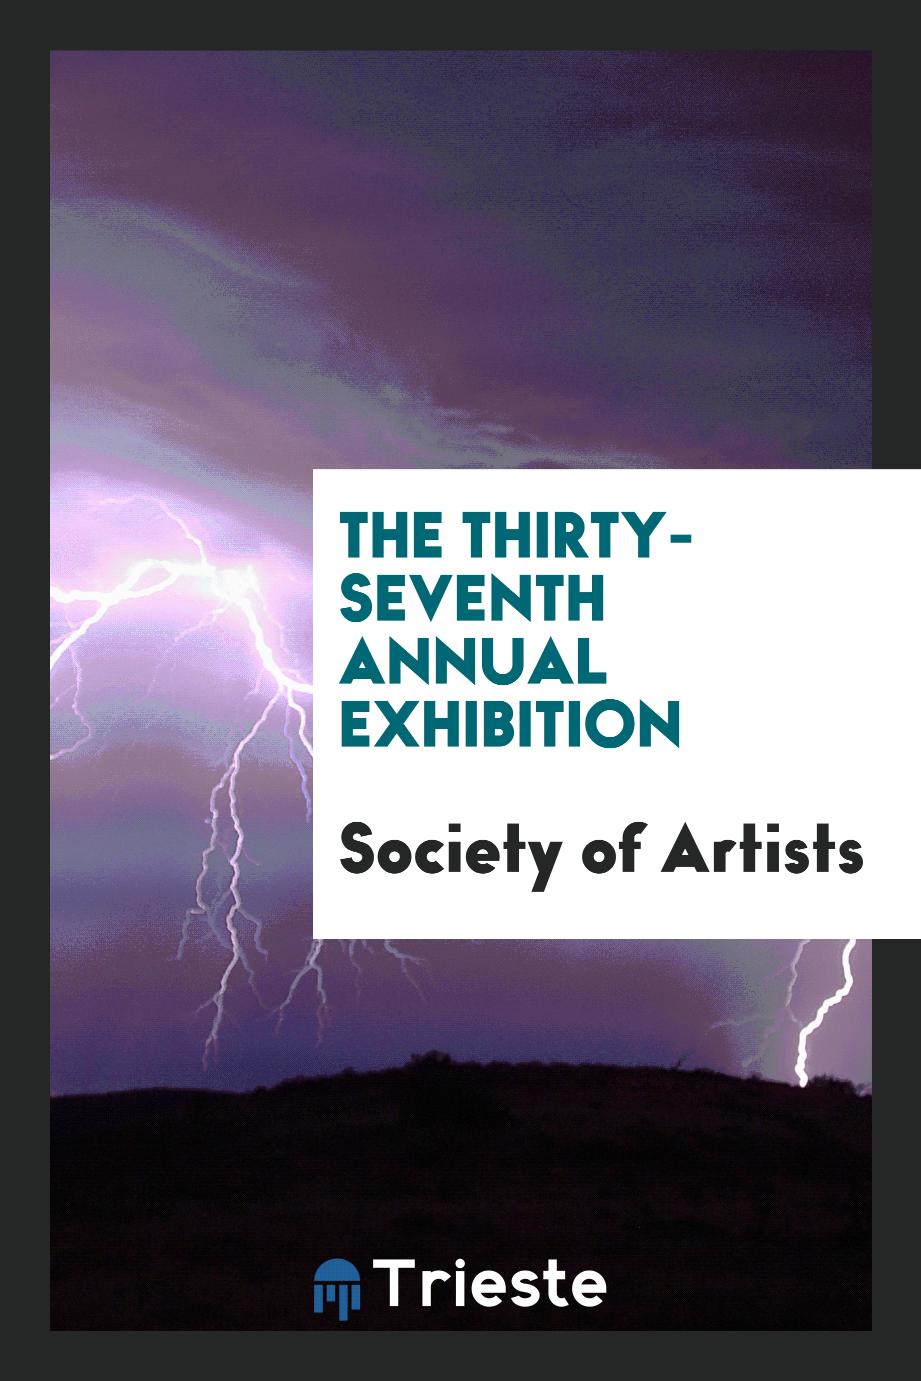 The thirty-seventh annual exhibition